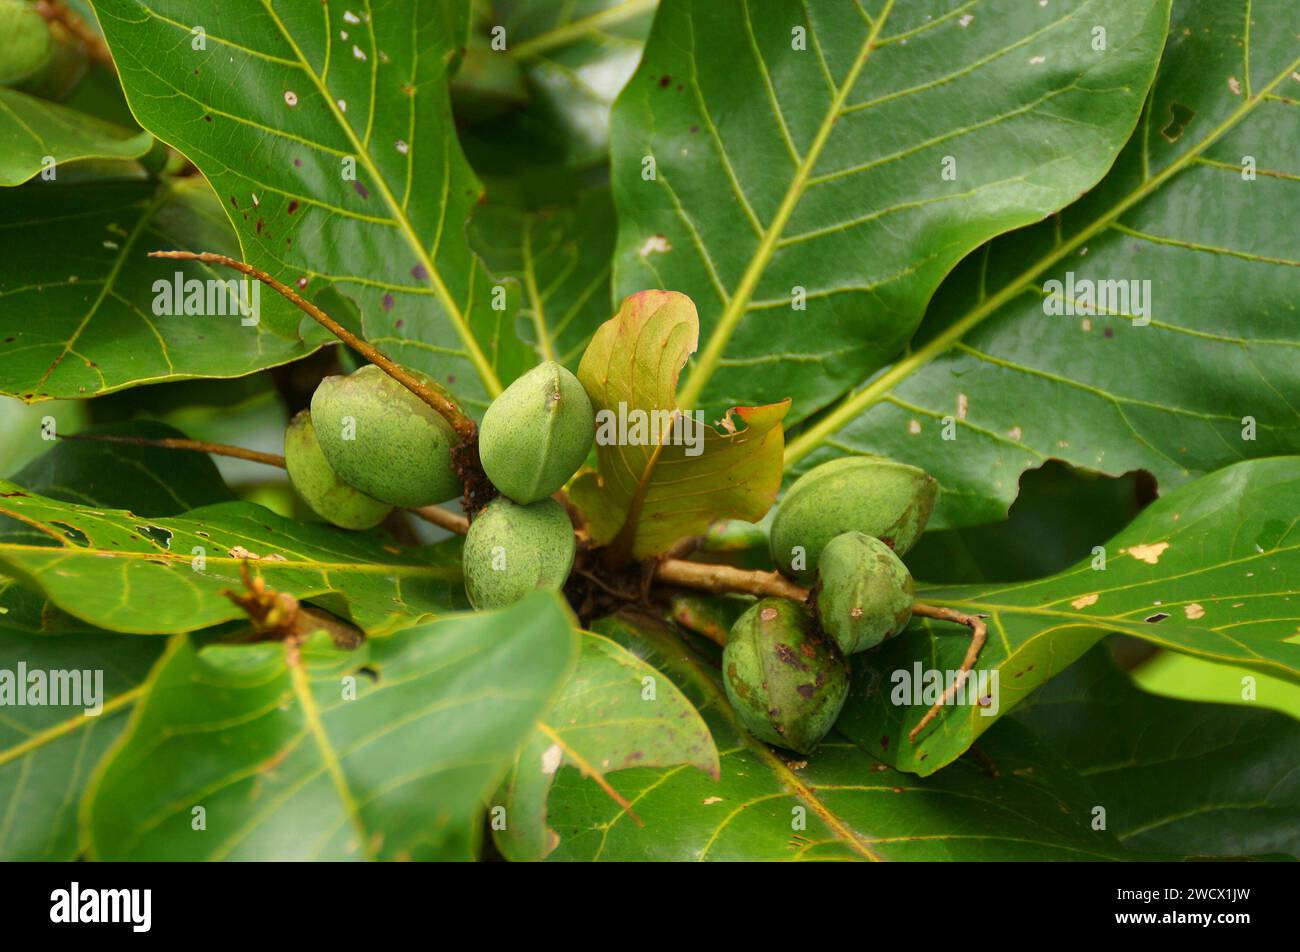 Tropical almond fruits on leaves Stock Photo